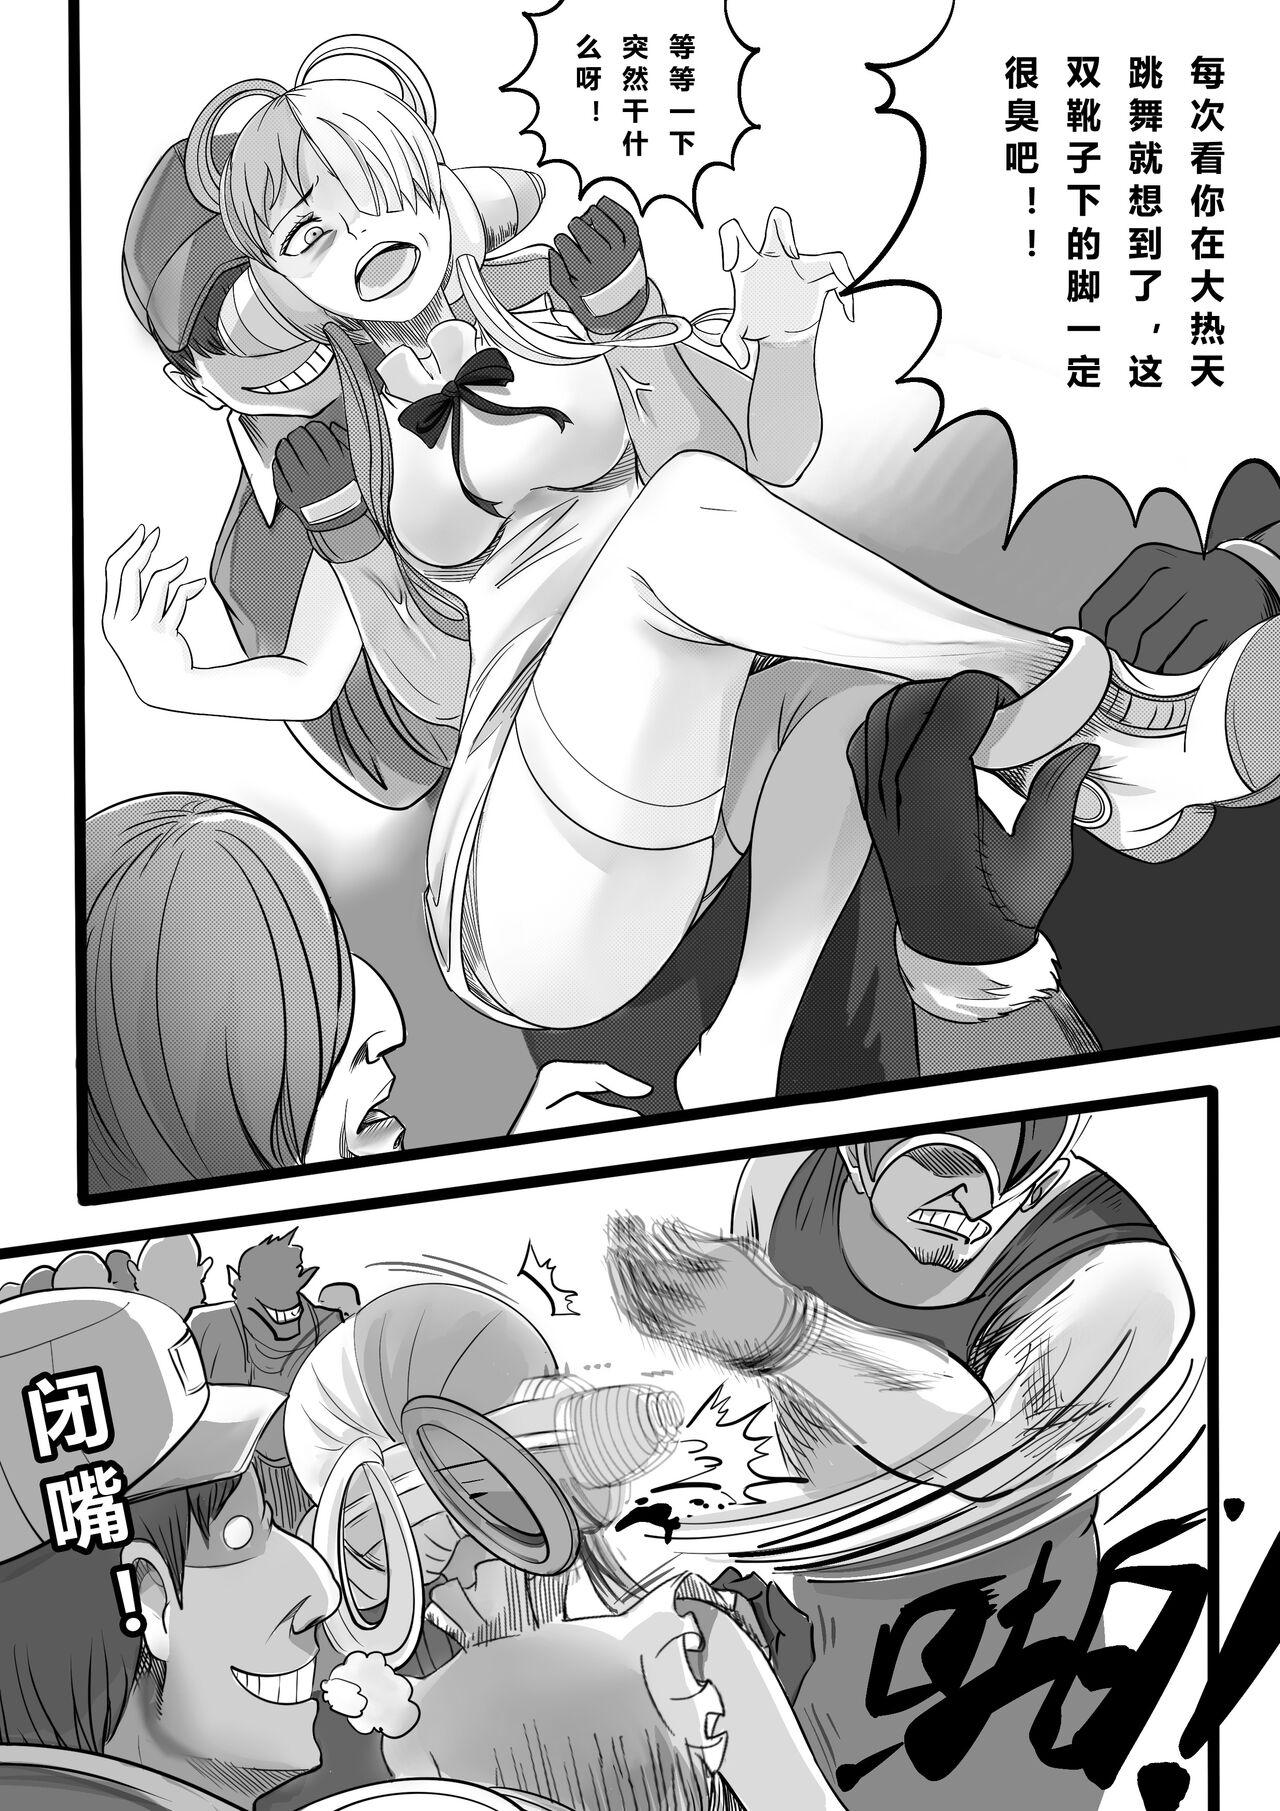 White Chick ONE PIECE 歌之魔女的监禁篇 - One piece Chacal - Page 3